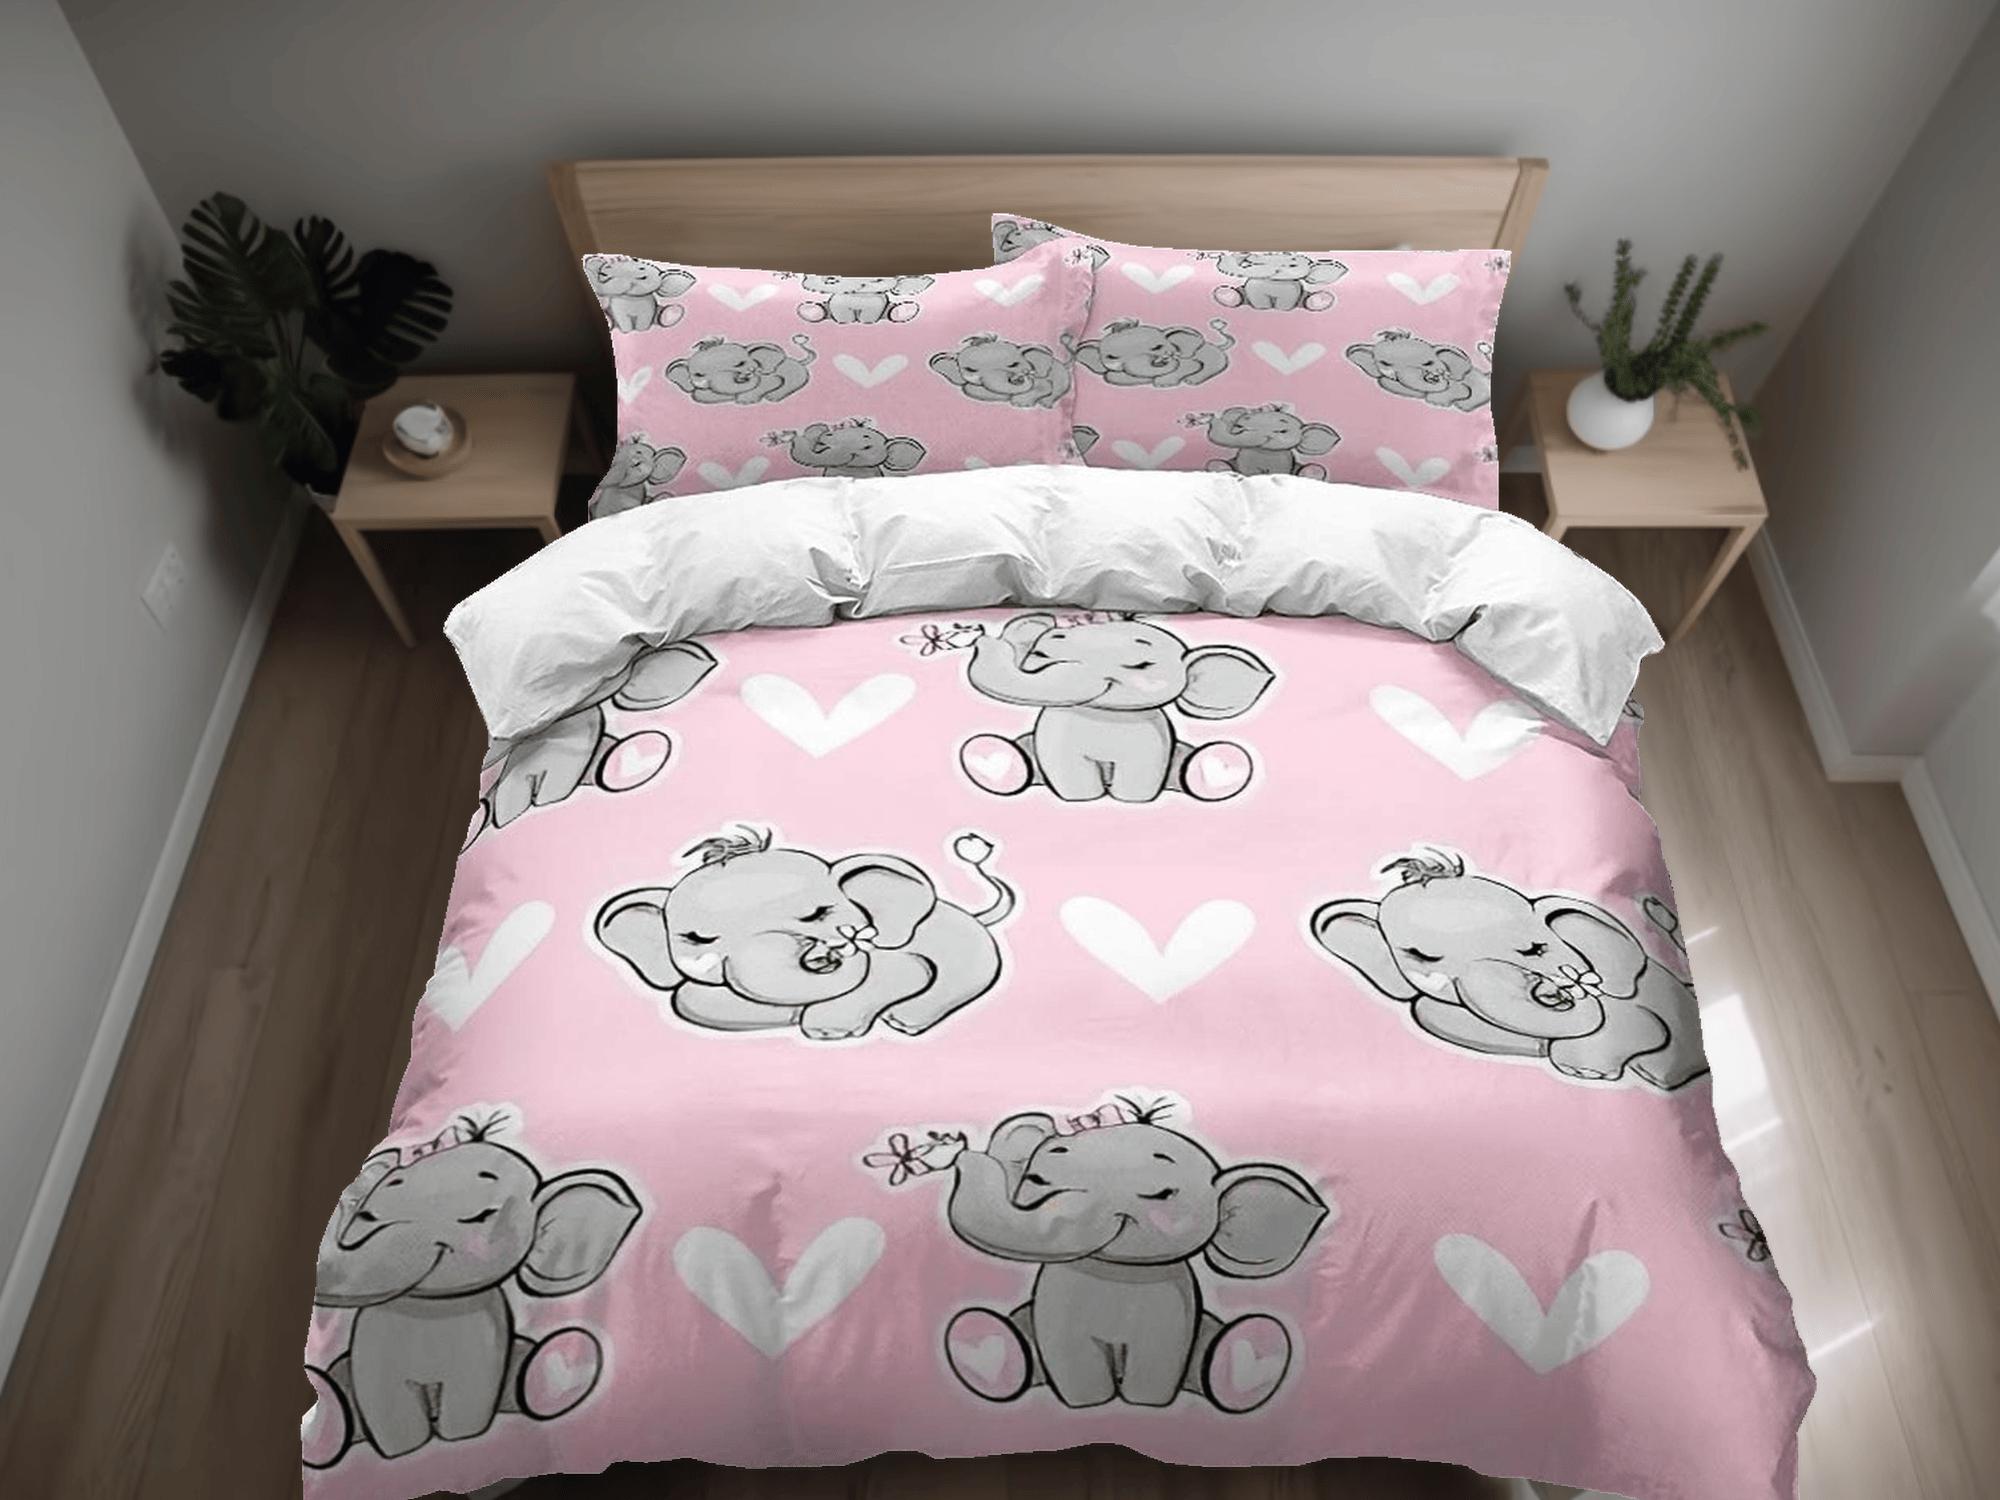 daintyduvet Elephant with hearts baby pink bedding cute duvet cover set, kids bedding full, nursery bed decor, elephant baby shower, toddler bedding